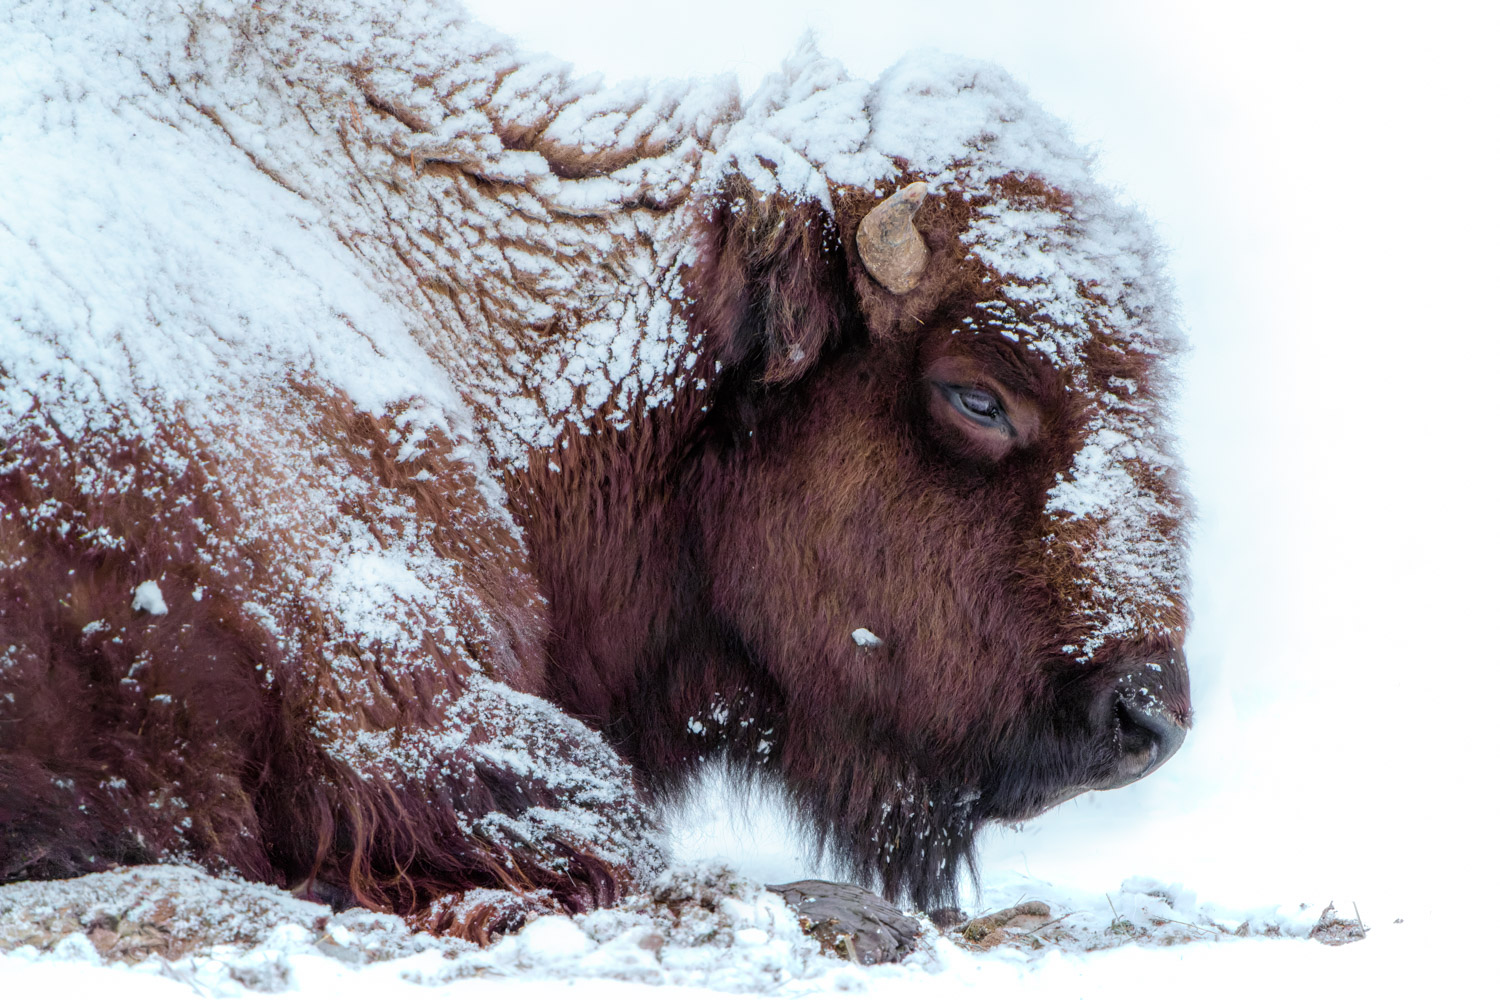 Bison calf in the snow